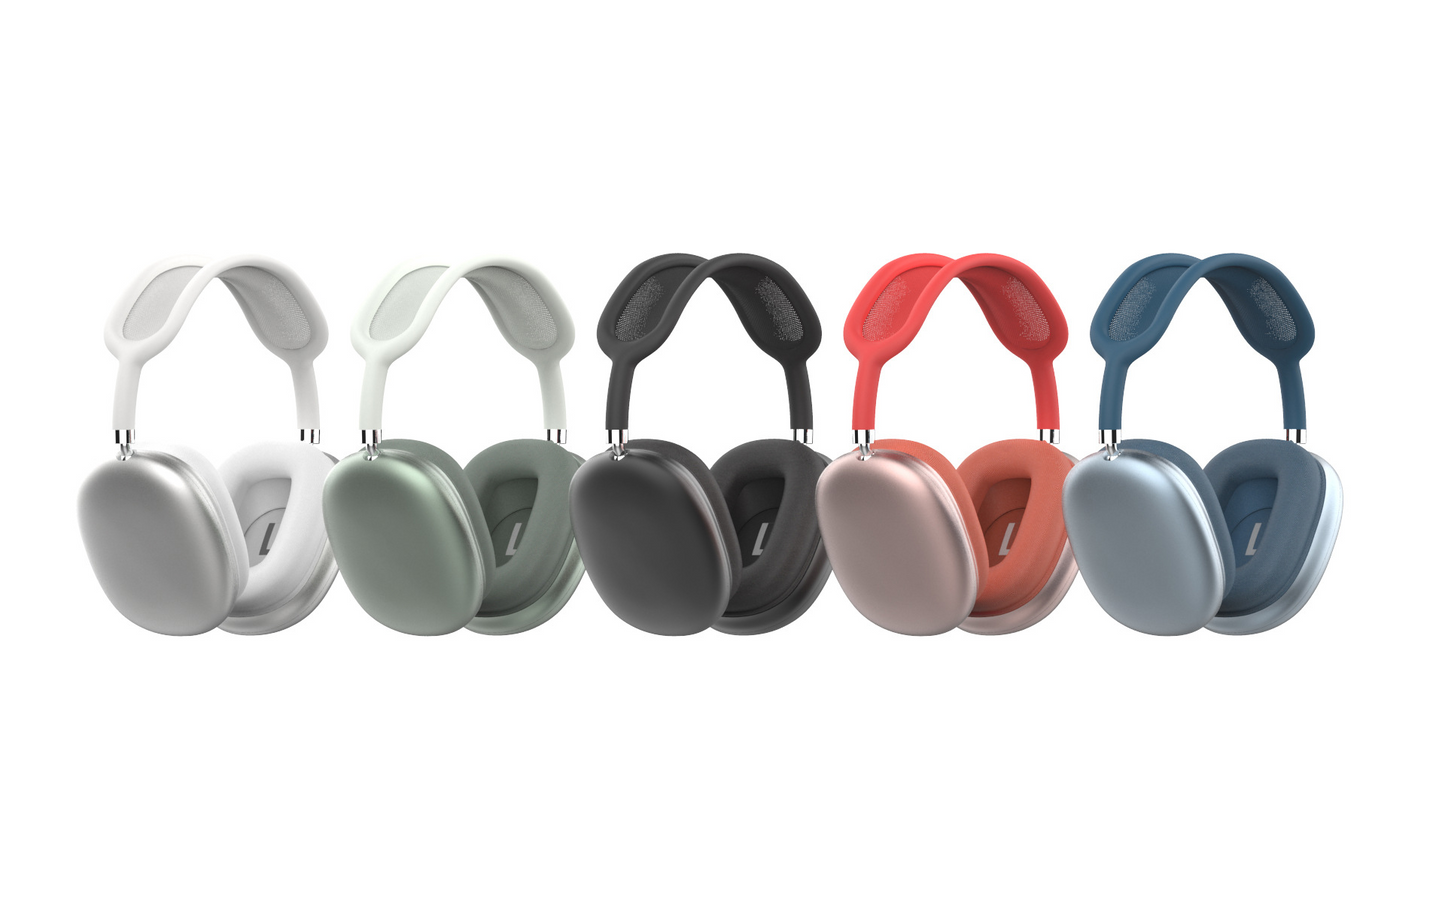 Wireless Sport Bluetooth Headphones with in Ear Detect Function. Available in 5 colors.